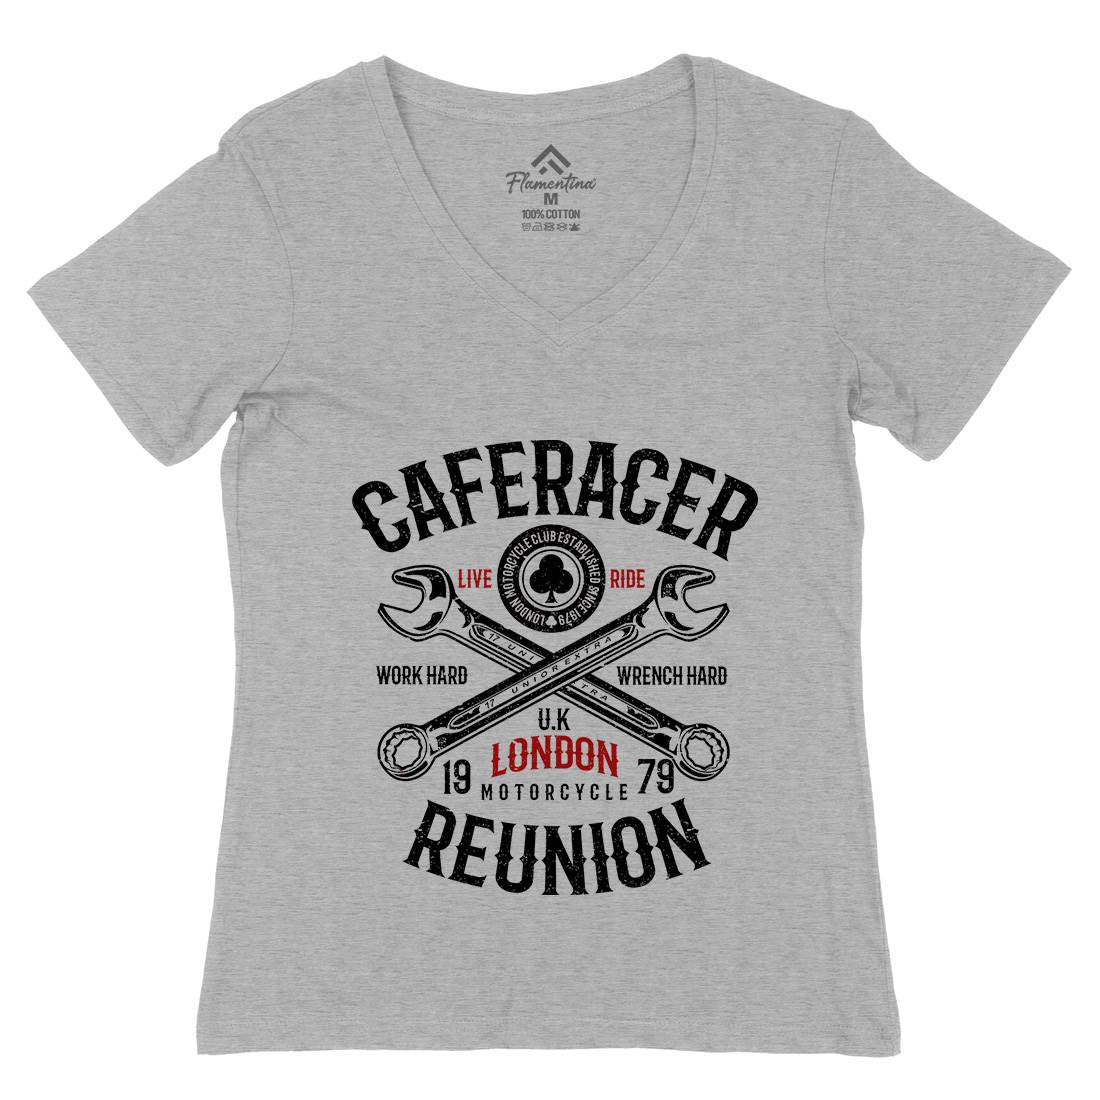 Caferacer Reunion Womens Organic V-Neck T-Shirt Motorcycles A025